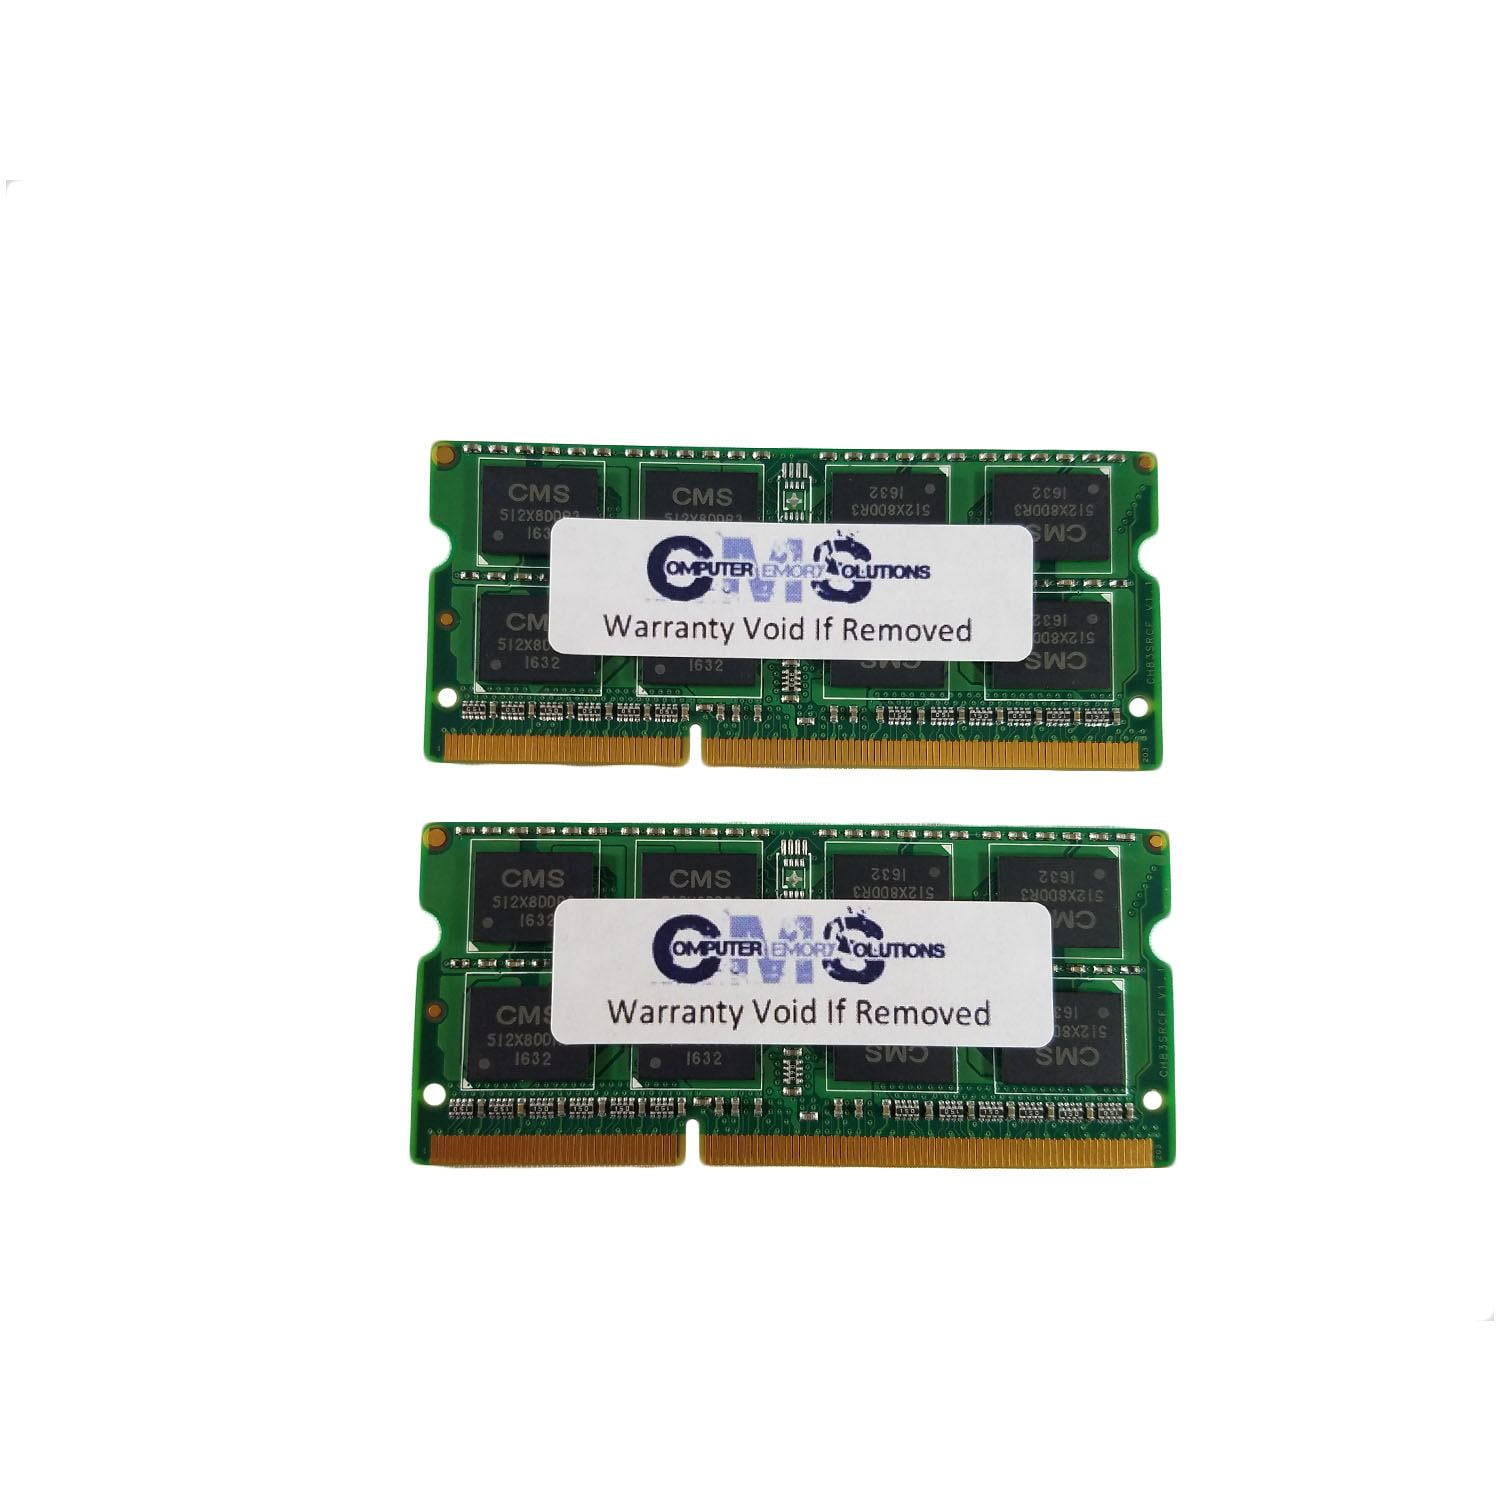 parts-quick 8GB Memory for ASUS A555LB Notebook DDR3L PC3L-12800 SODIMM Compatible RAM